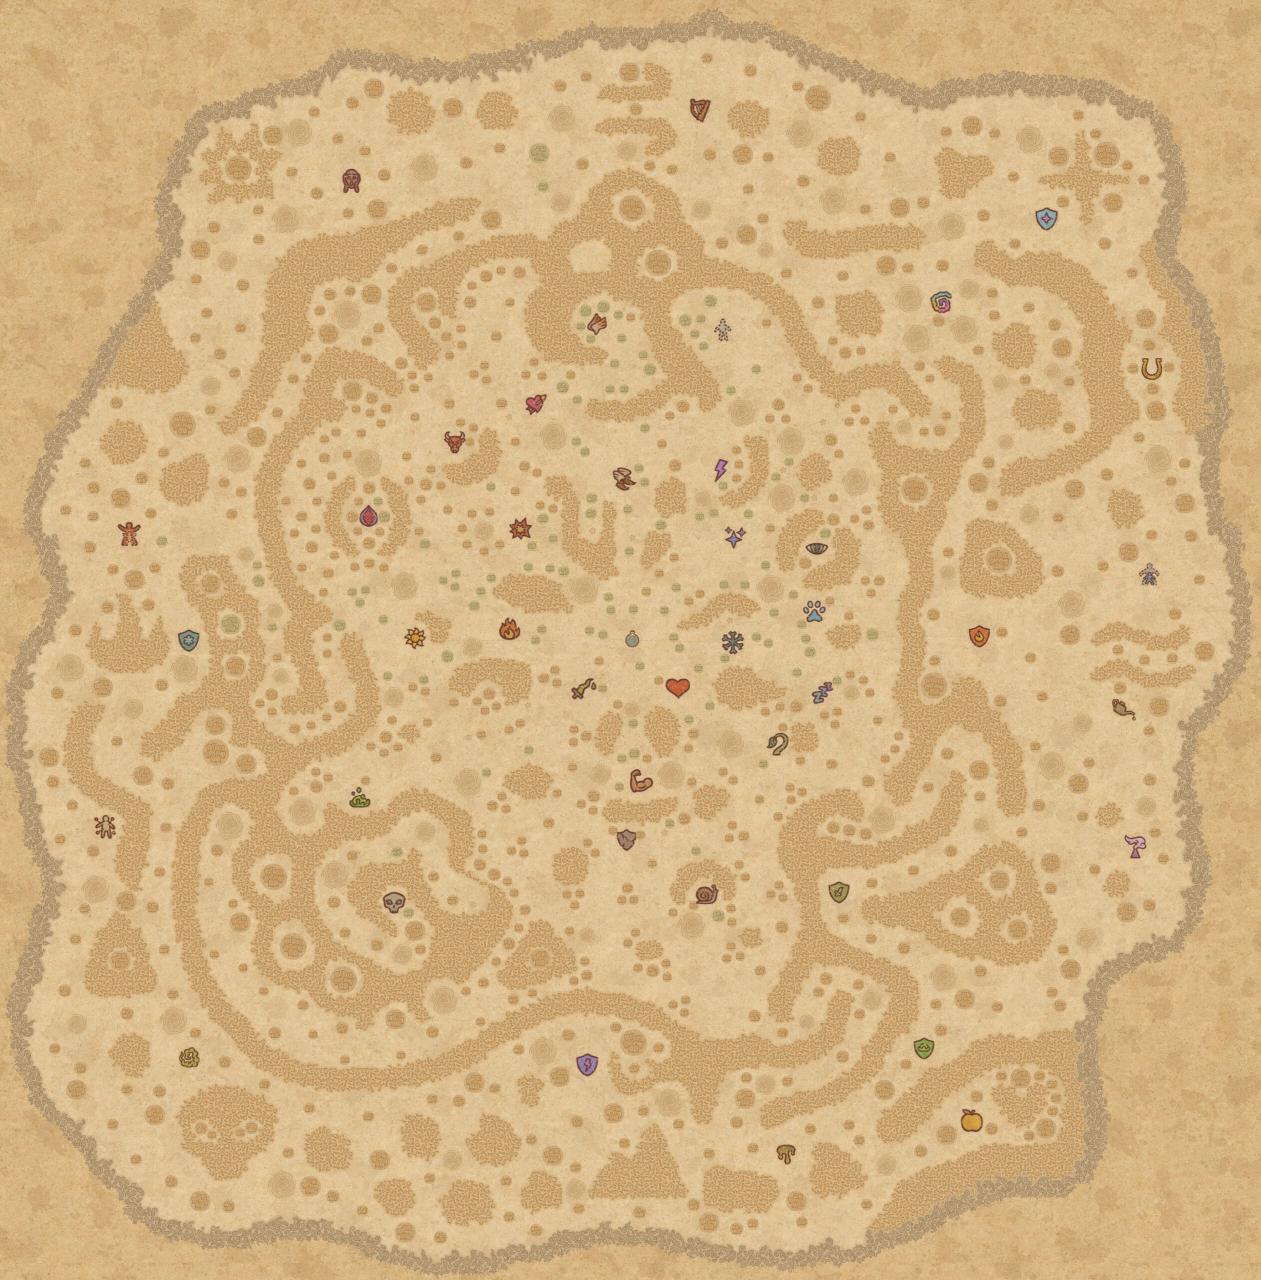 photo of the full water map for our potion craft maps guide